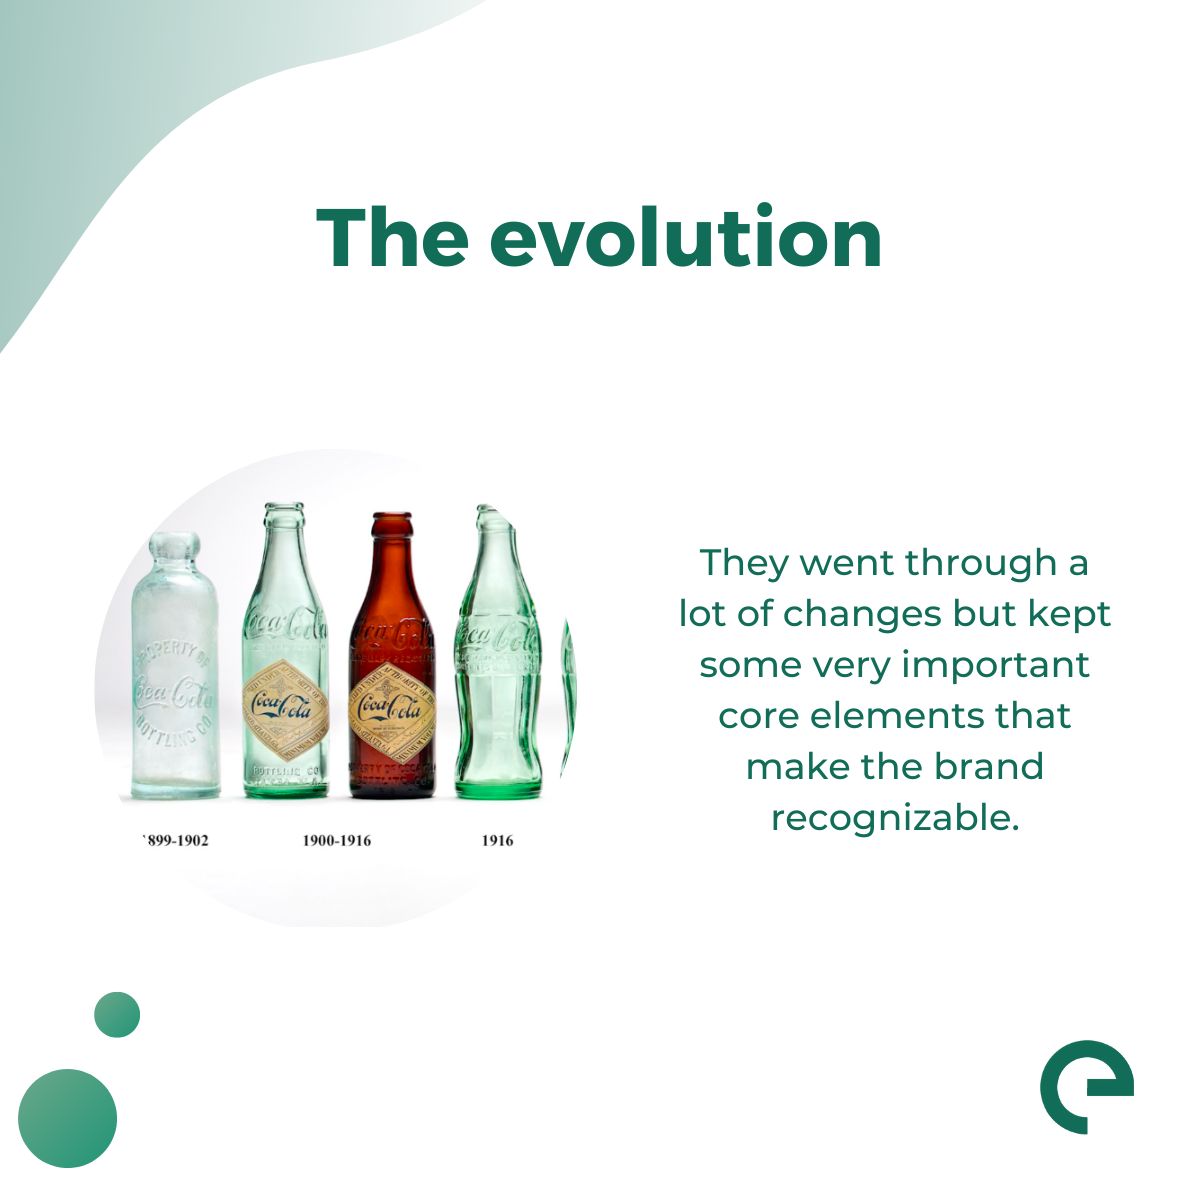 How about studying the Coca Cola logo? 📺 We looked at how Coca Cola has successfully changed its bottle design over the years. Get started with @expozedotio here: bit.ly/3k06PEE #meetexpoze #attention #marketingtips